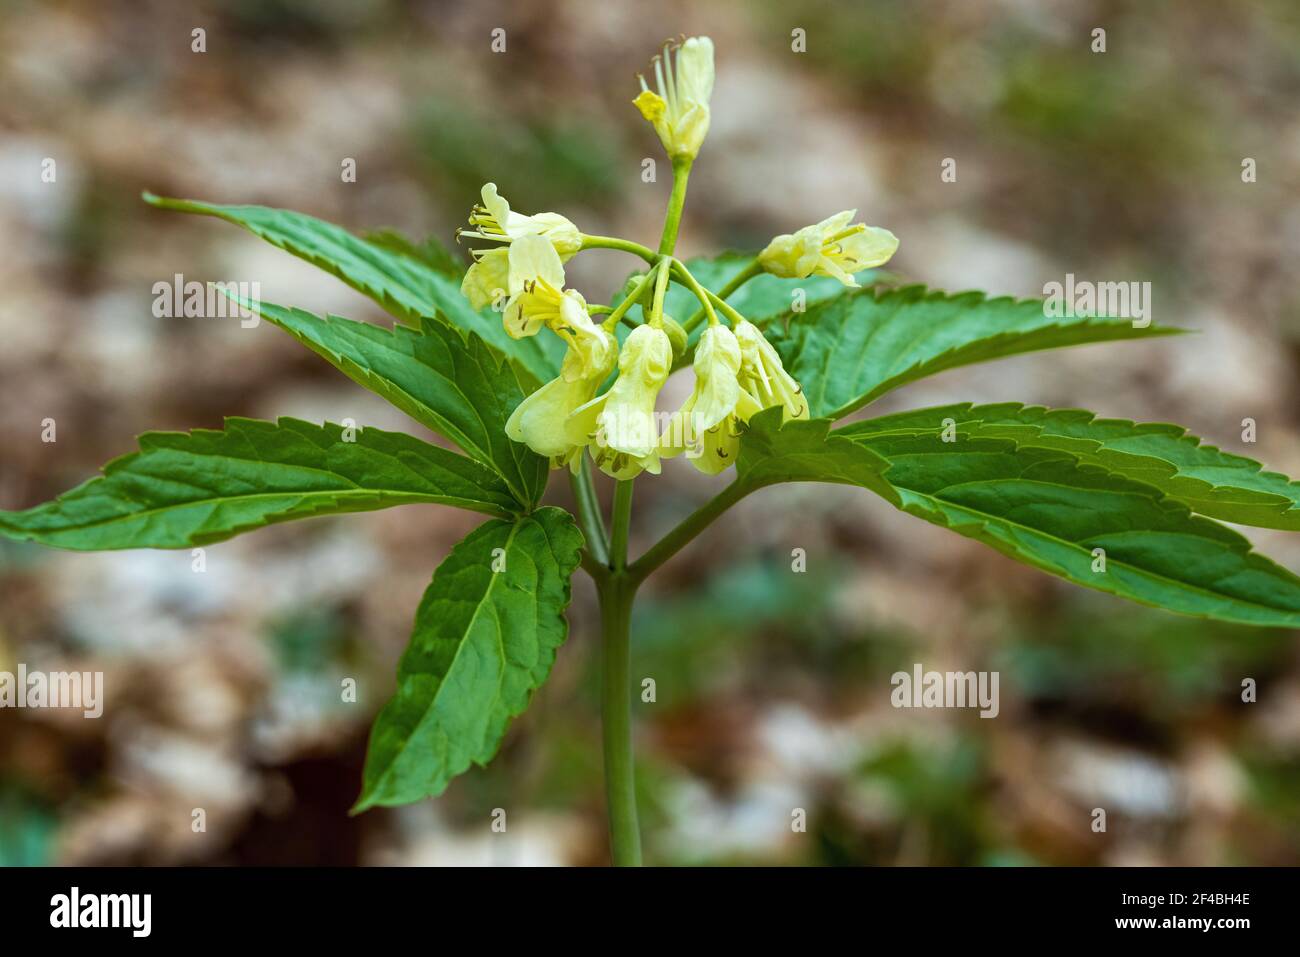 Cardamine enneaphylla in bloom on the forest floor Stock Photo